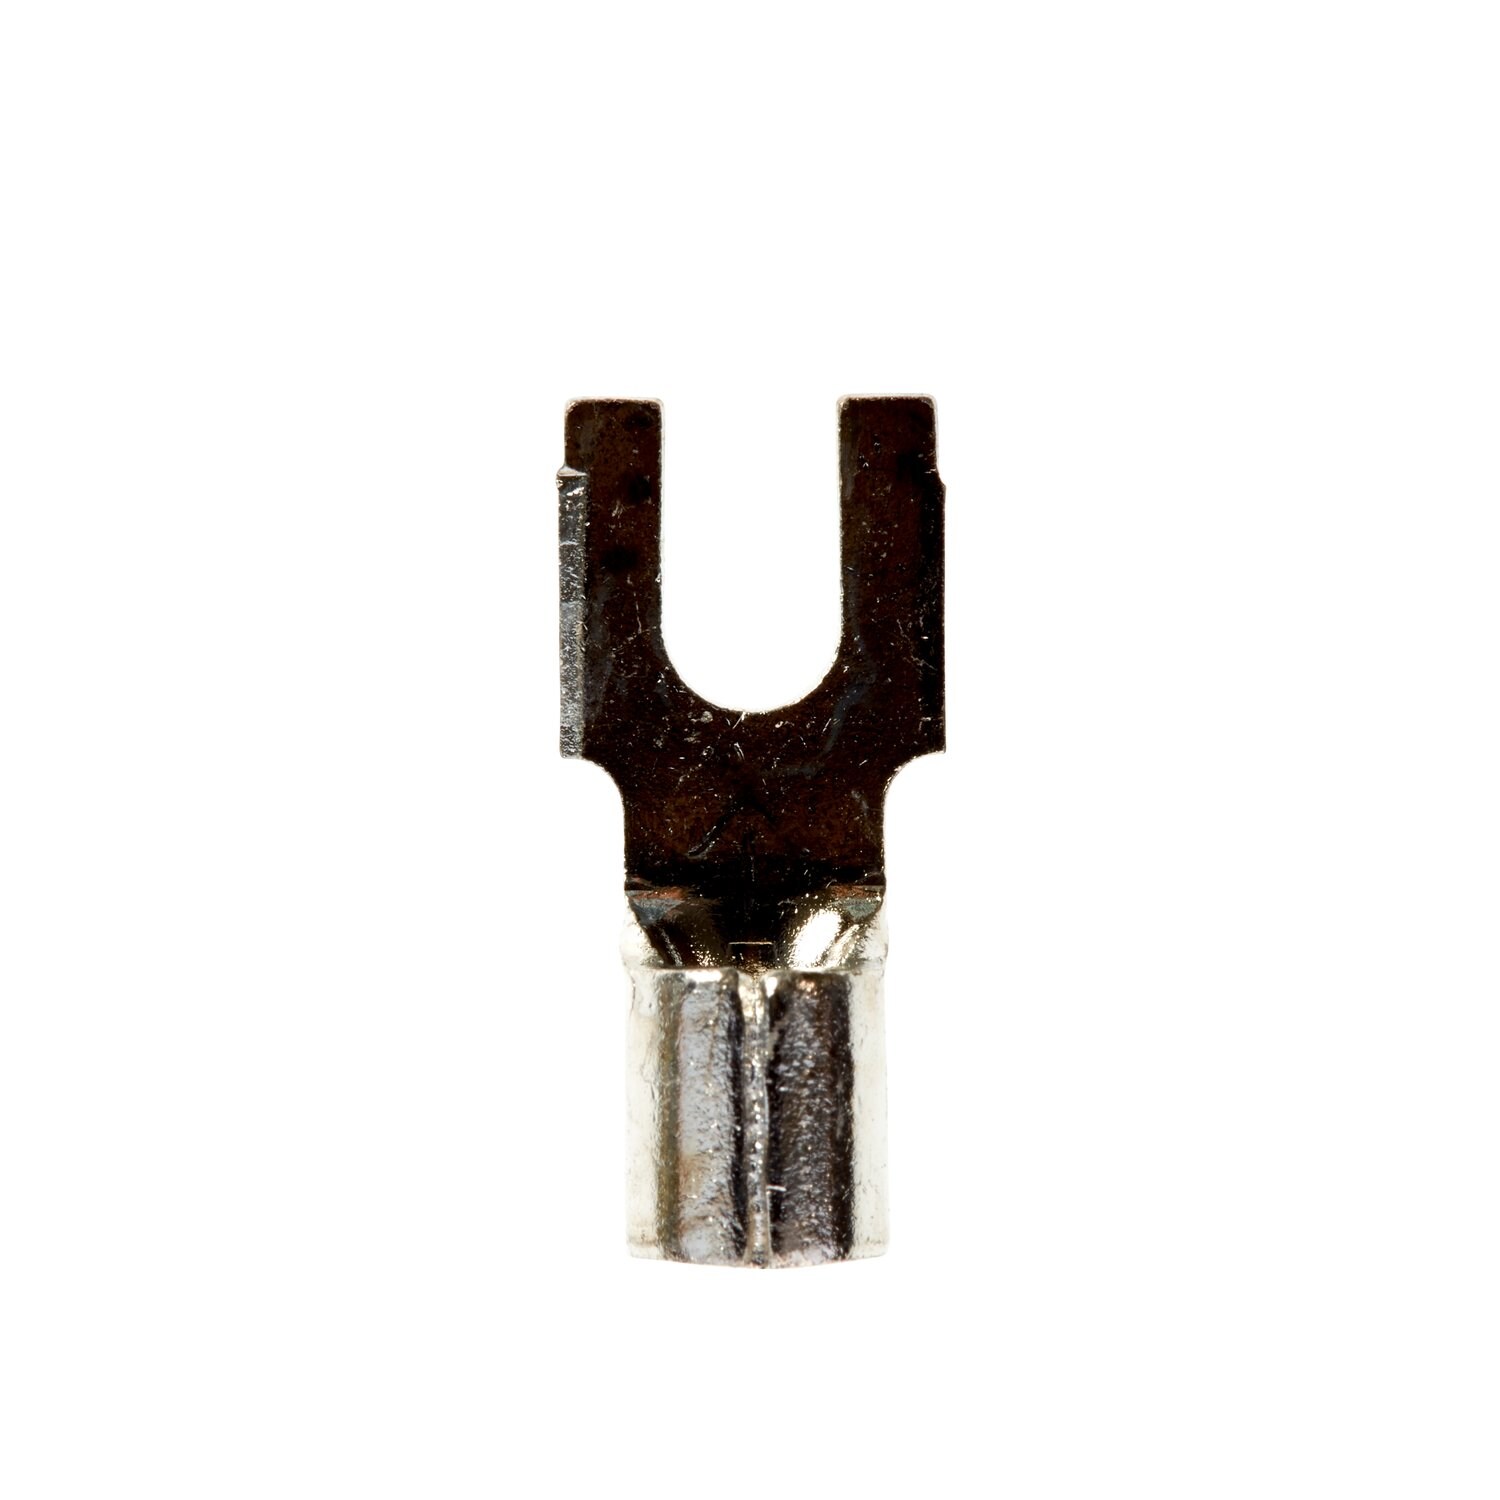 7100164110 - 3M Scotchlok Block Fork, Non-Insulated Brazed Seam M10-6FBK, Stud Size
6, suitable for use in a terminal block, 500/Case